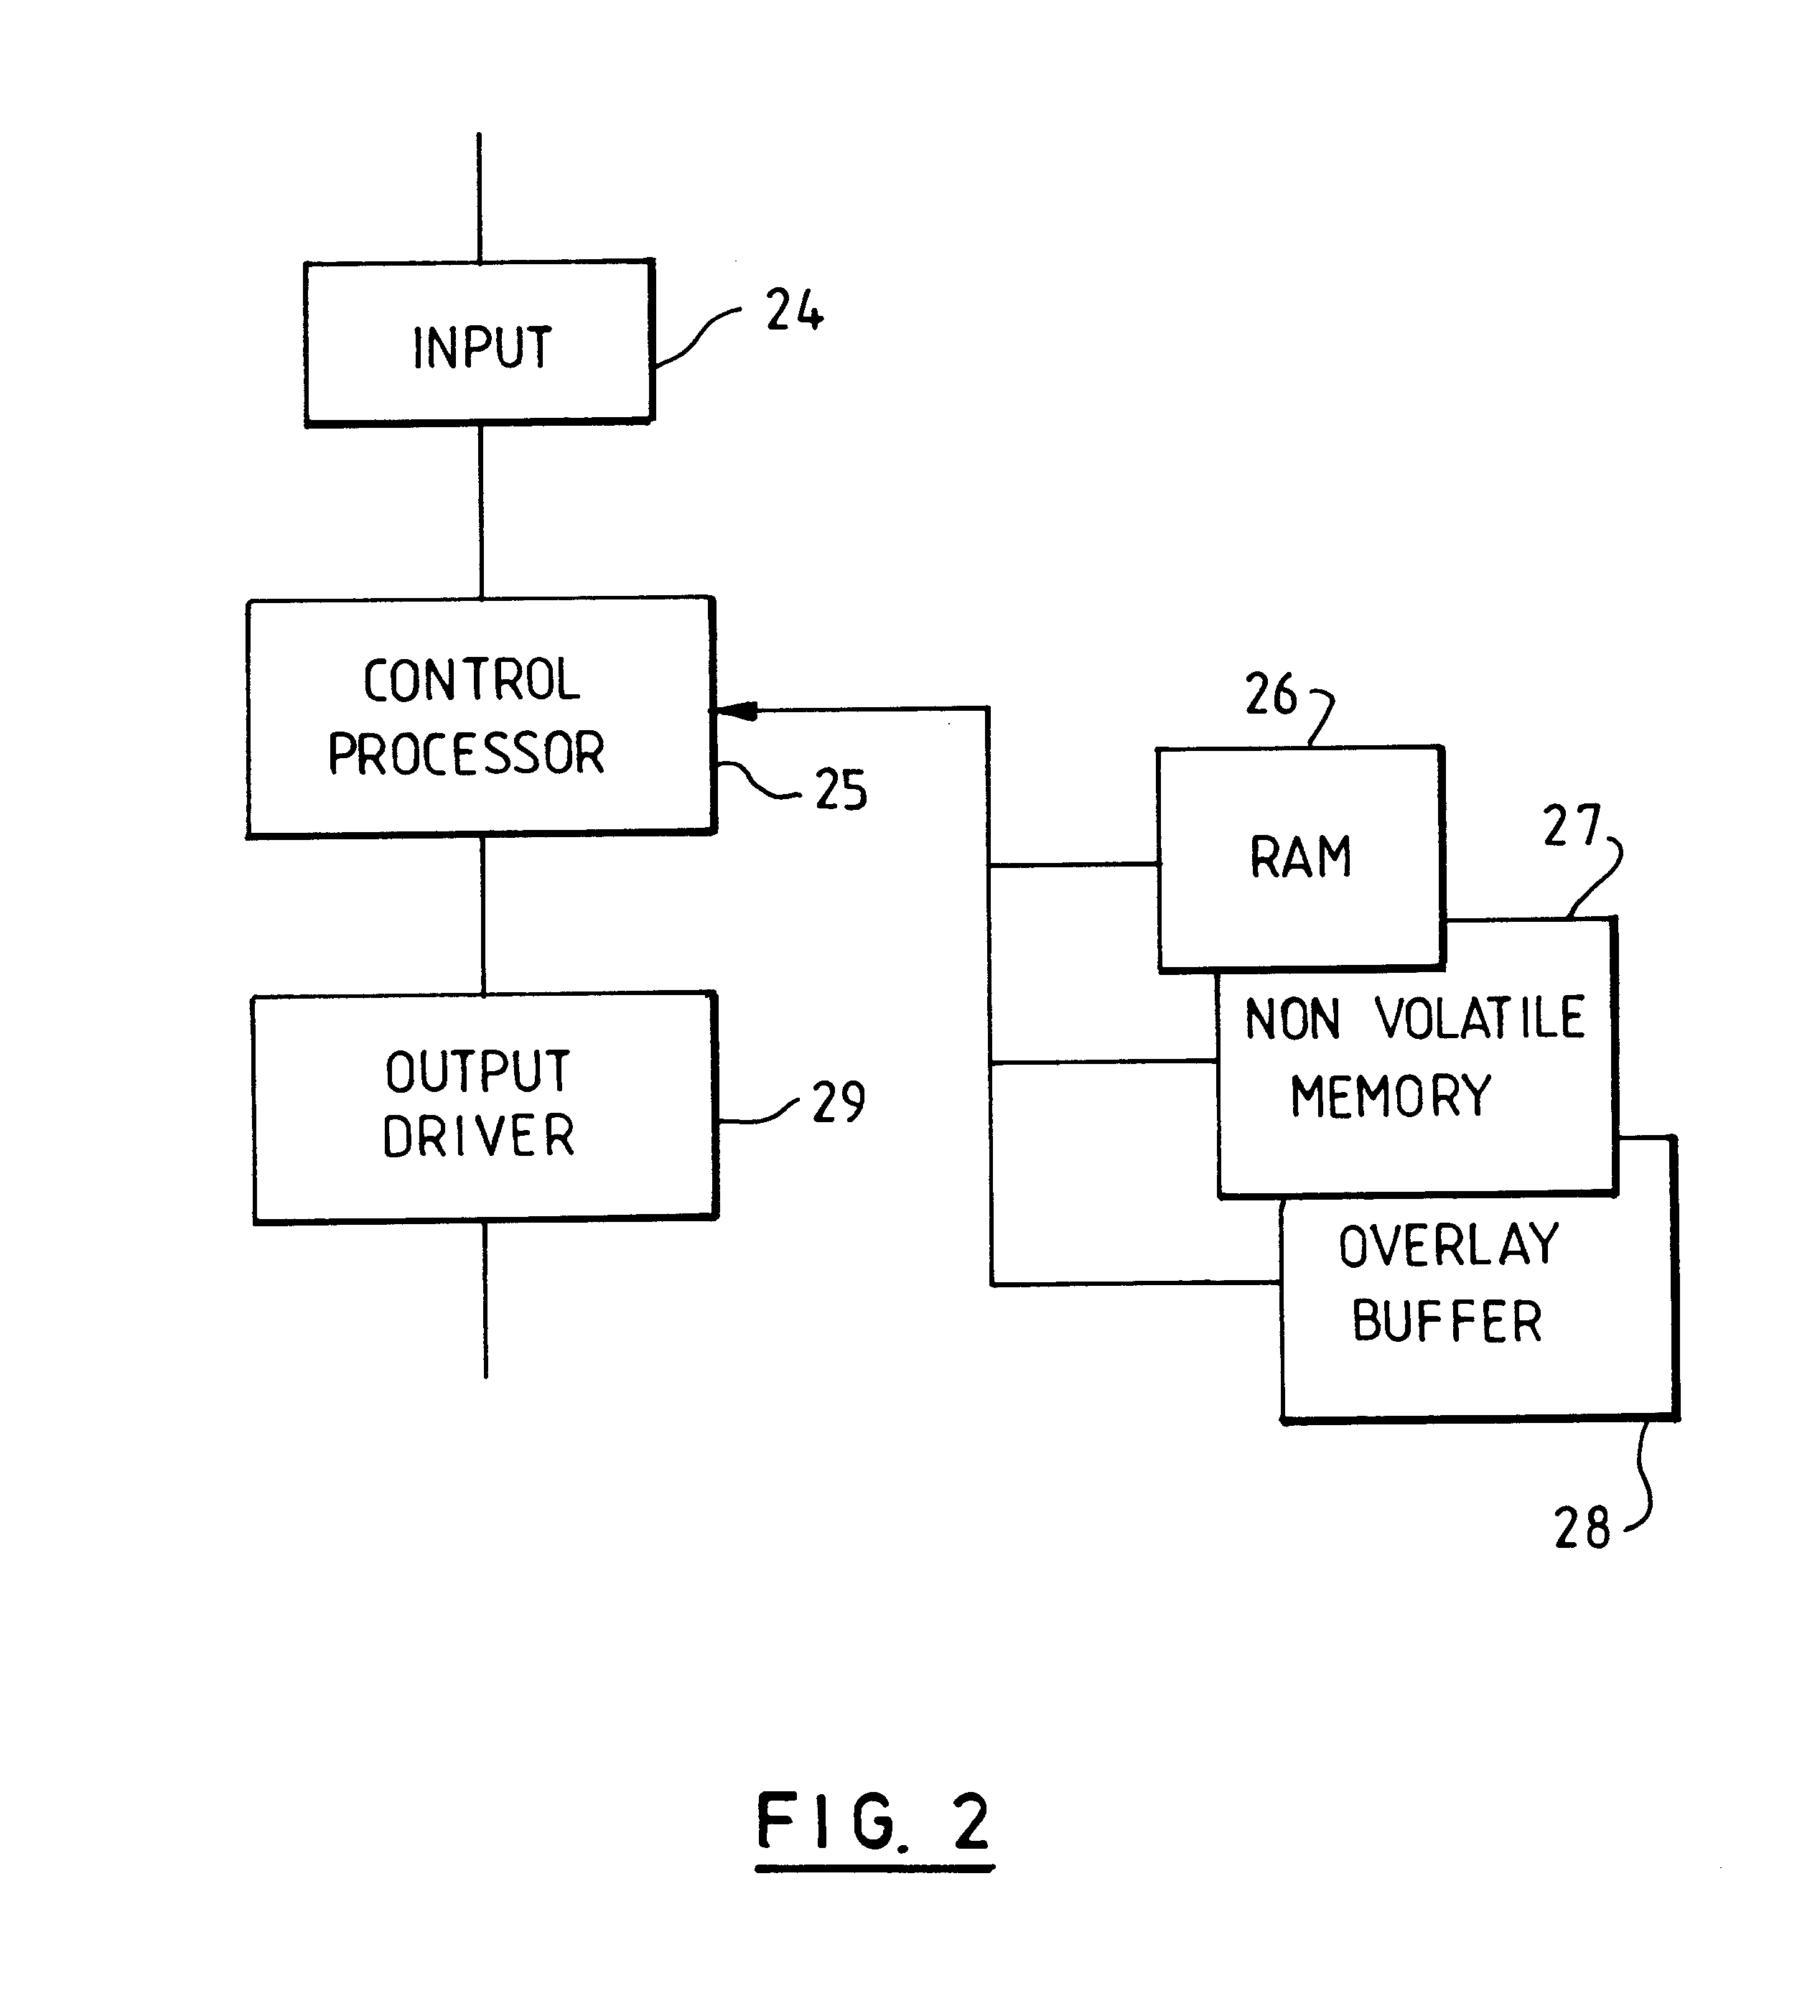 Controlling video or image presentation according to encoded content classification information within the video or image data